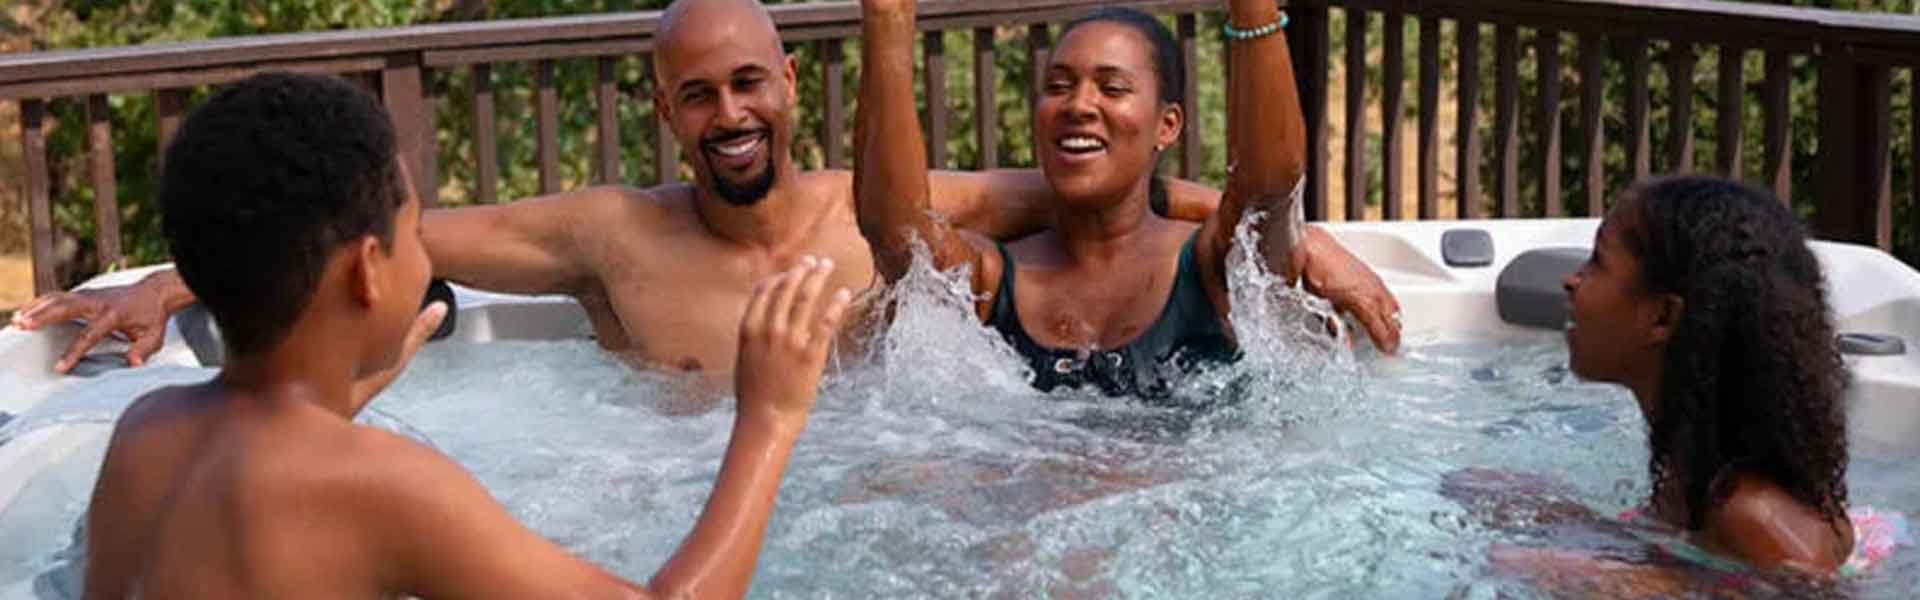 1920x600 Hot Spring Spas Blog Creating Quality Time The Benefits Of Spending Time With Family In A Hot Tub